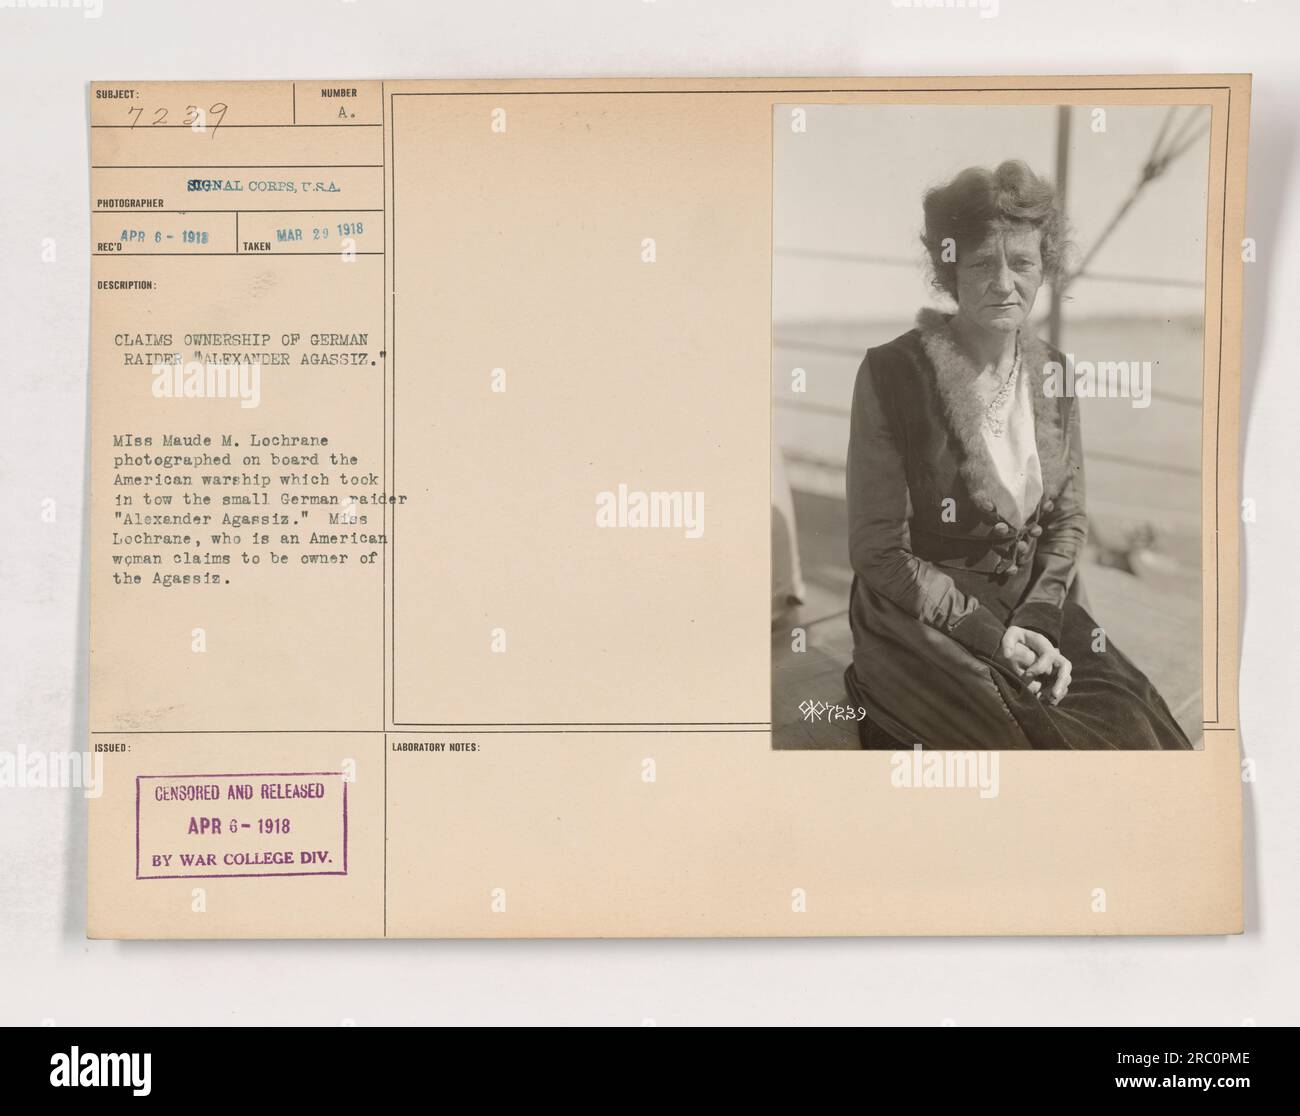 The photograph depicts Miss Maude M. Lochrane onboard an American warship that was towing the small German raider, 'Alexander Agassiz.' Miss Lochrane, an American woman, claims ownership of the Agassiz. The photo was censored and released on April 6, 1918, by the War College Division Laboratory. The photographer is Hinder A. Signal Corps. Stock Photo